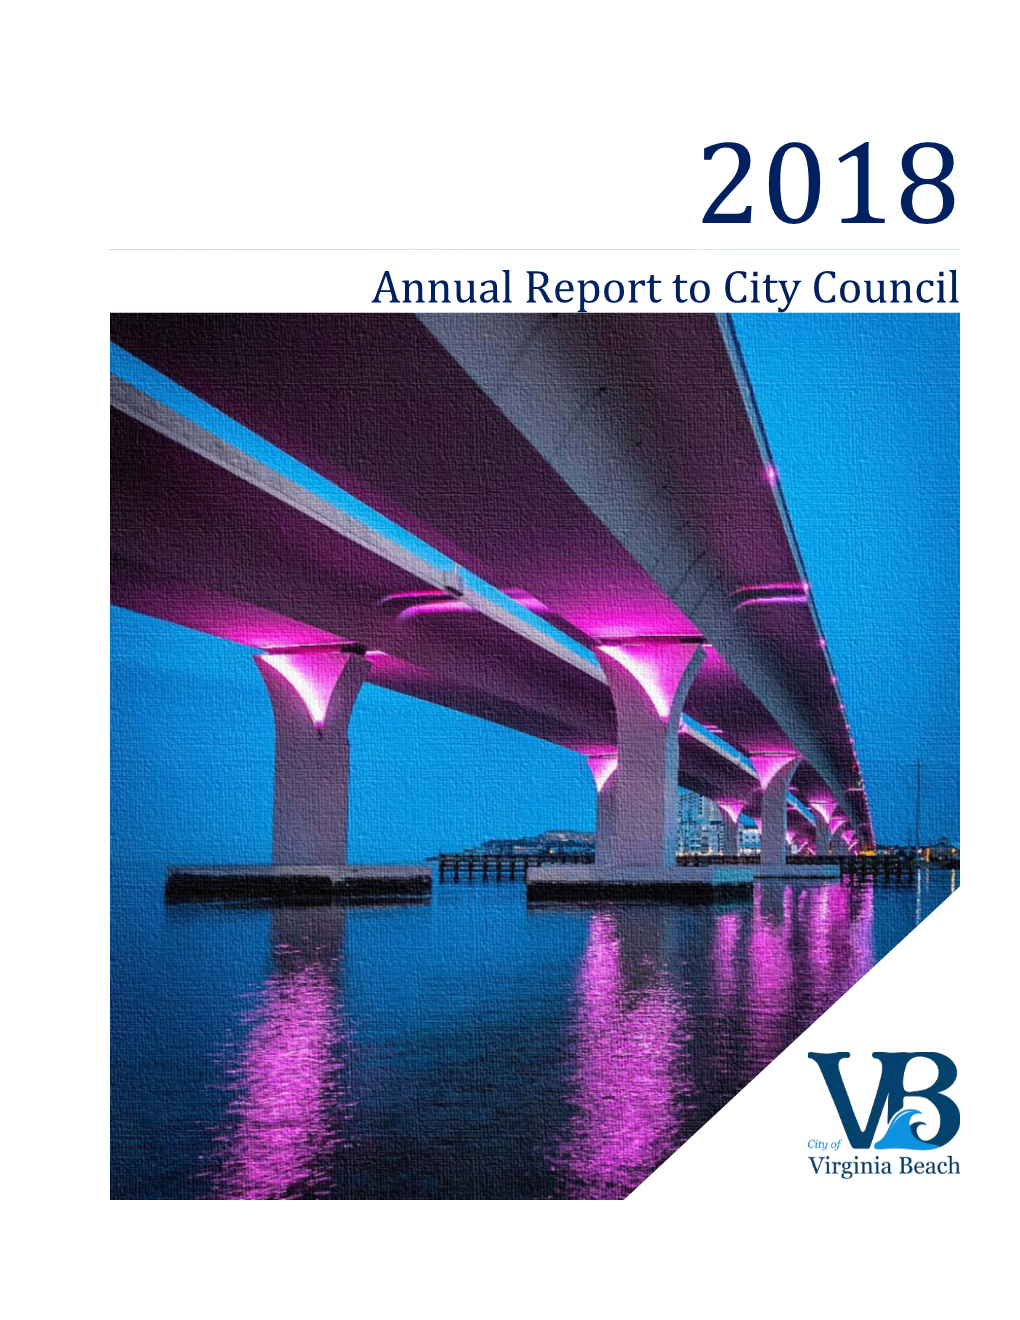 Annual Report to City Council